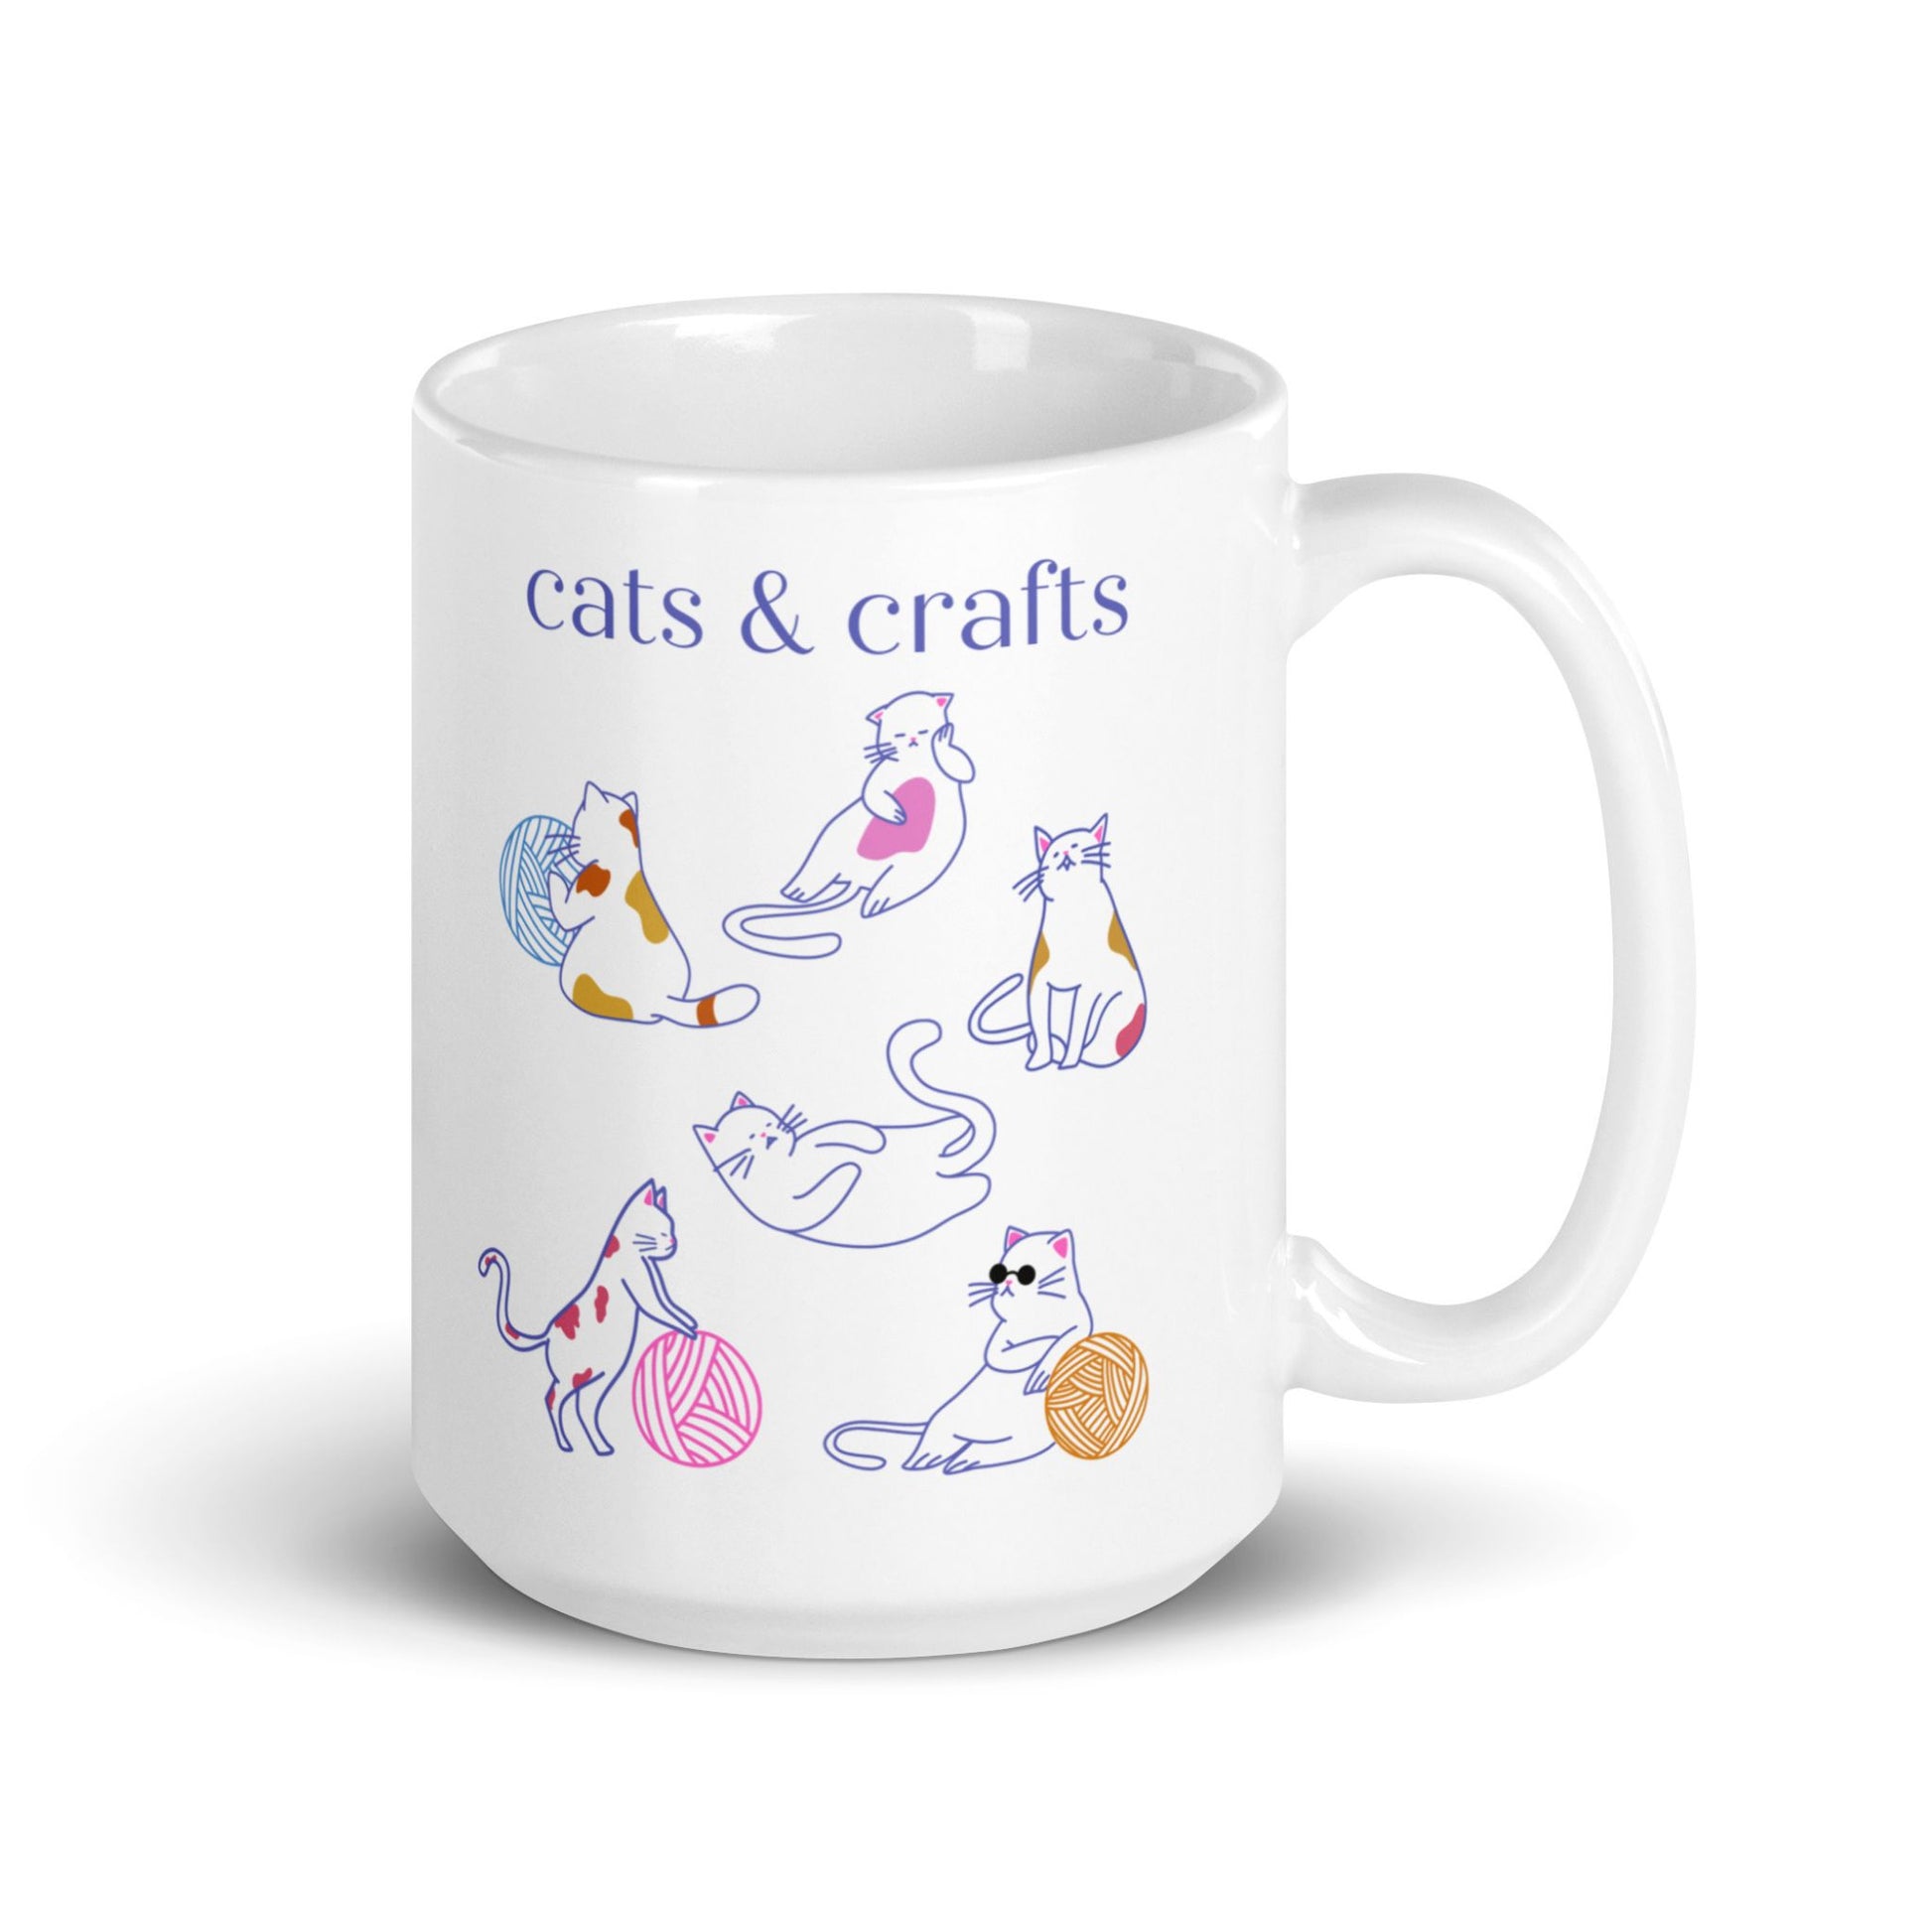 cats and crafts mug - wear and woven